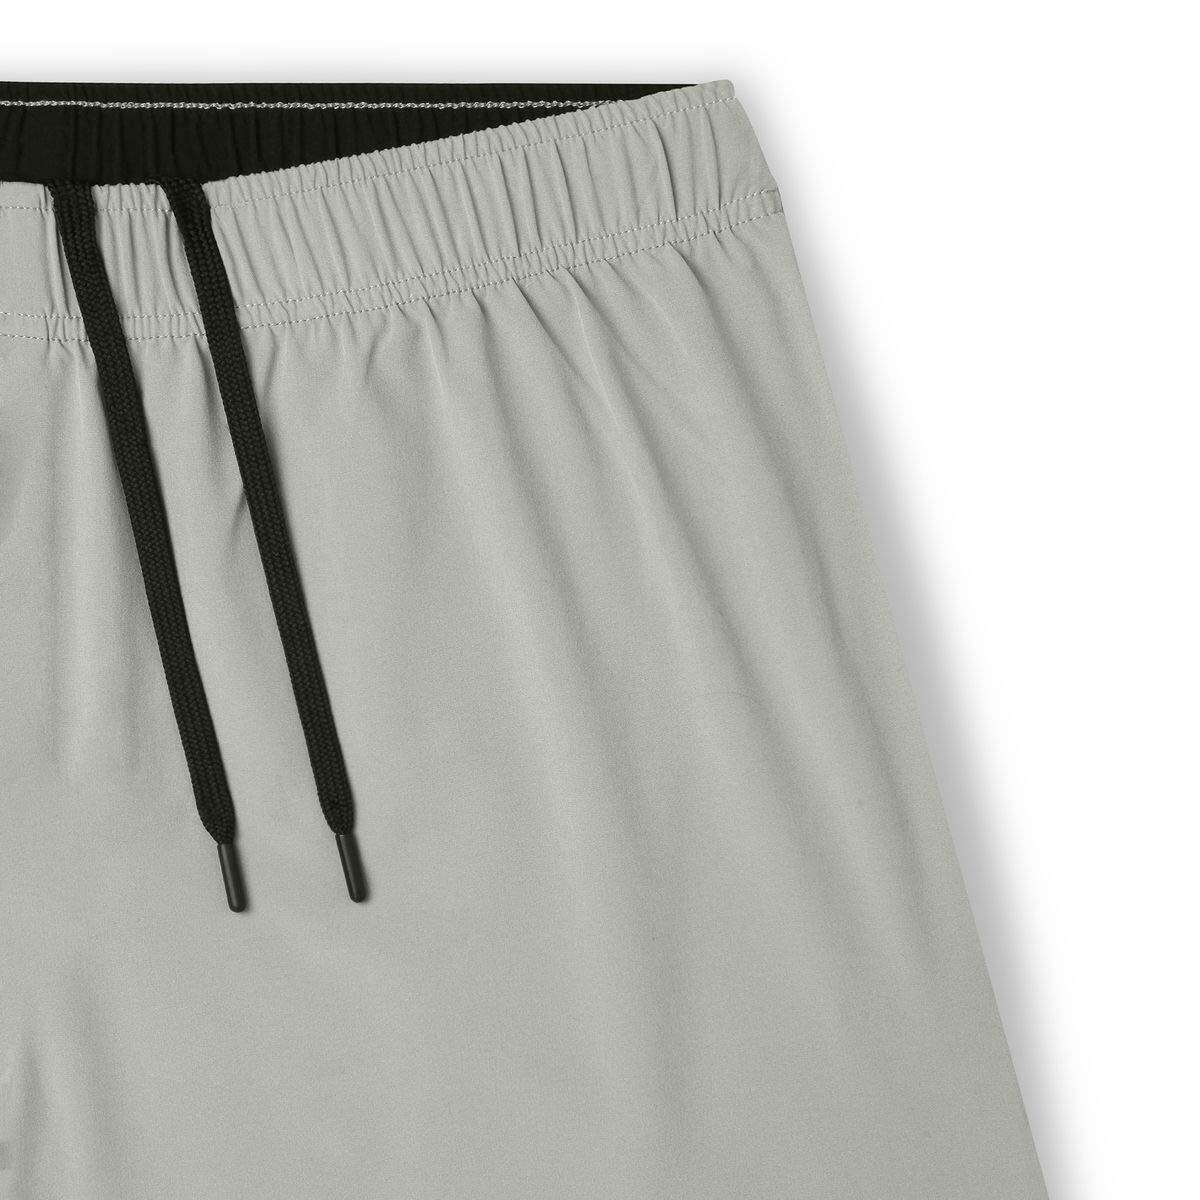 Men's Ultra 2-in-1 Running Shorts with Key Pocket - Cool Grey/Black 4/5